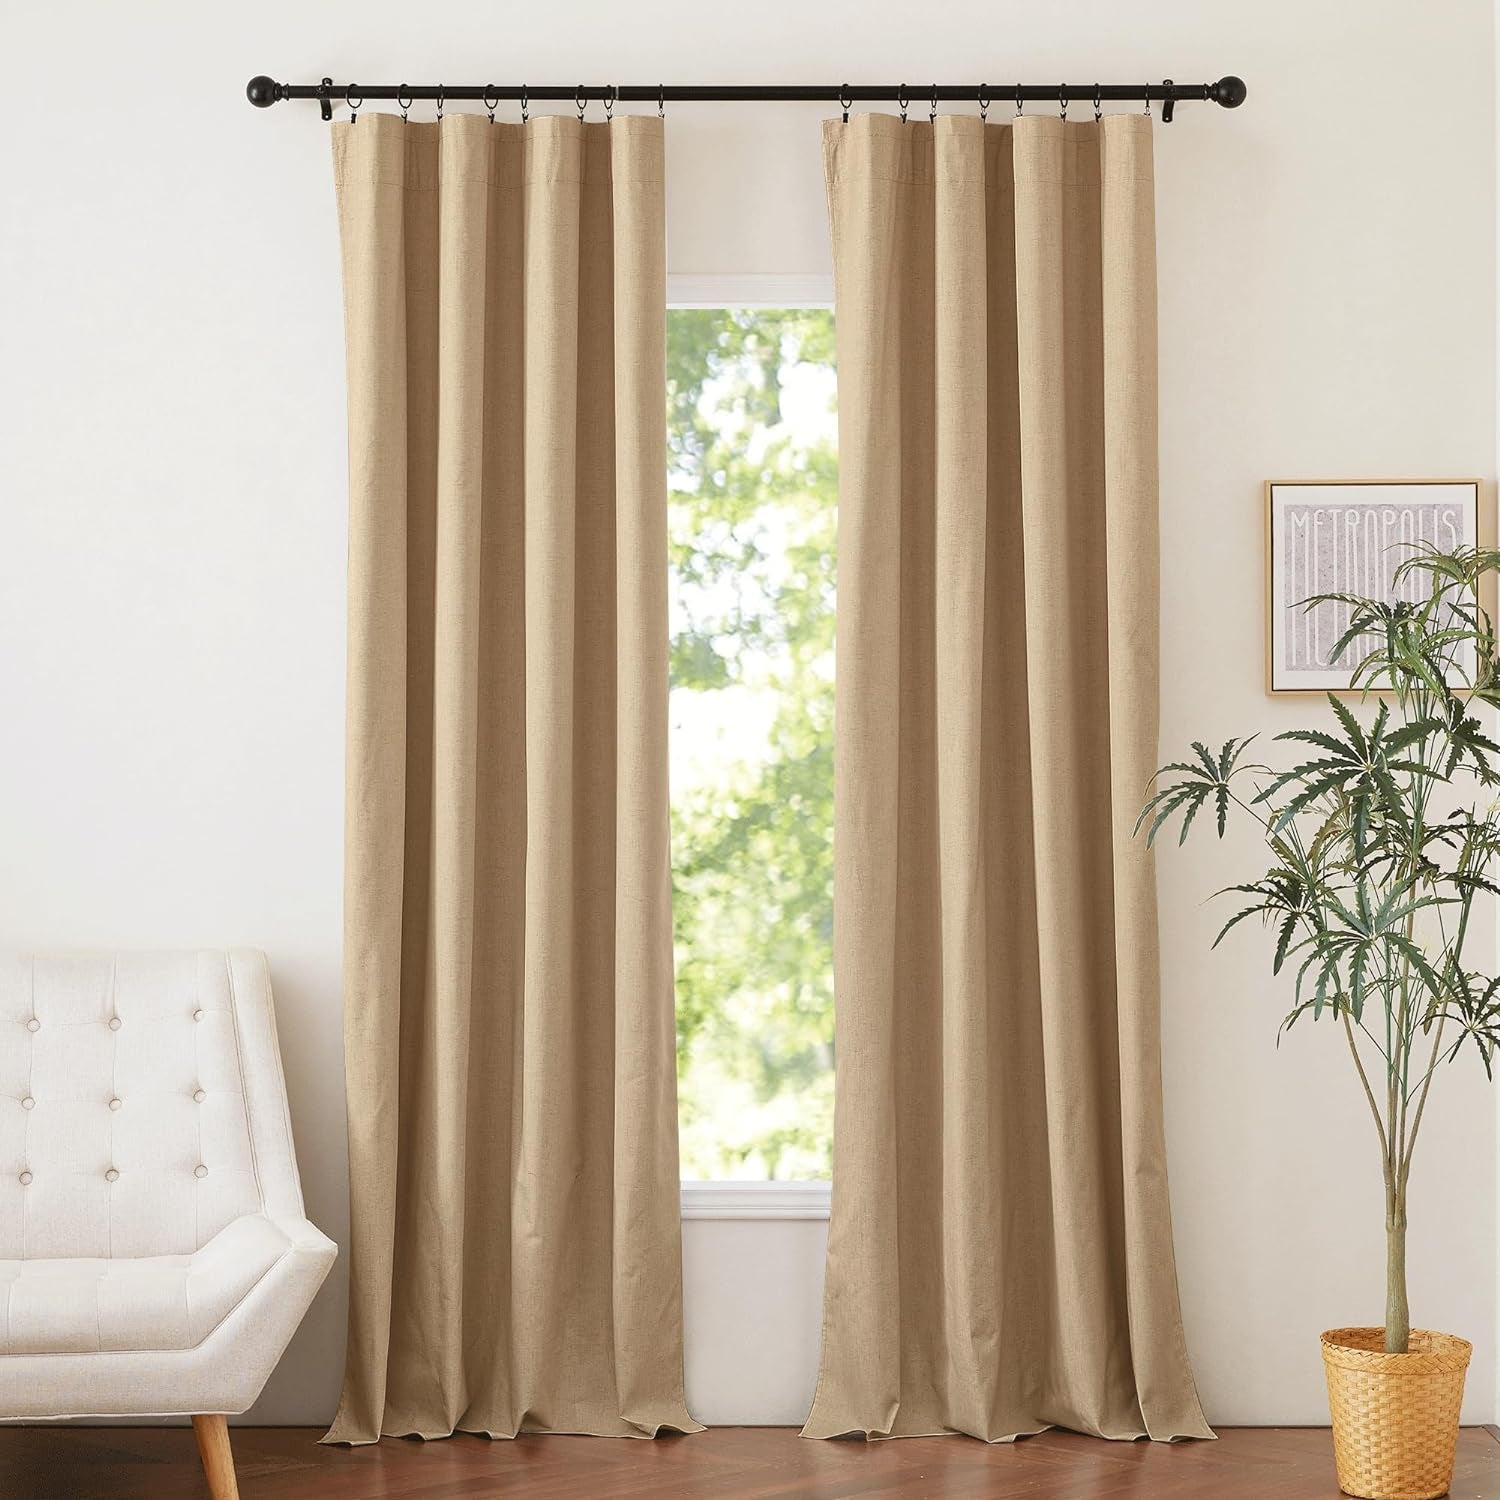 NICETOWN 100% Blackout Natural Linen Bedroom Curtains 52" Width by 95" Length 2 Panels with Thermal Insulated Liners, Farmhouse Style Keep Warm Dual Rod Pocket Window Draperies for Living Room  NICETOWN Camel W52 X L95 